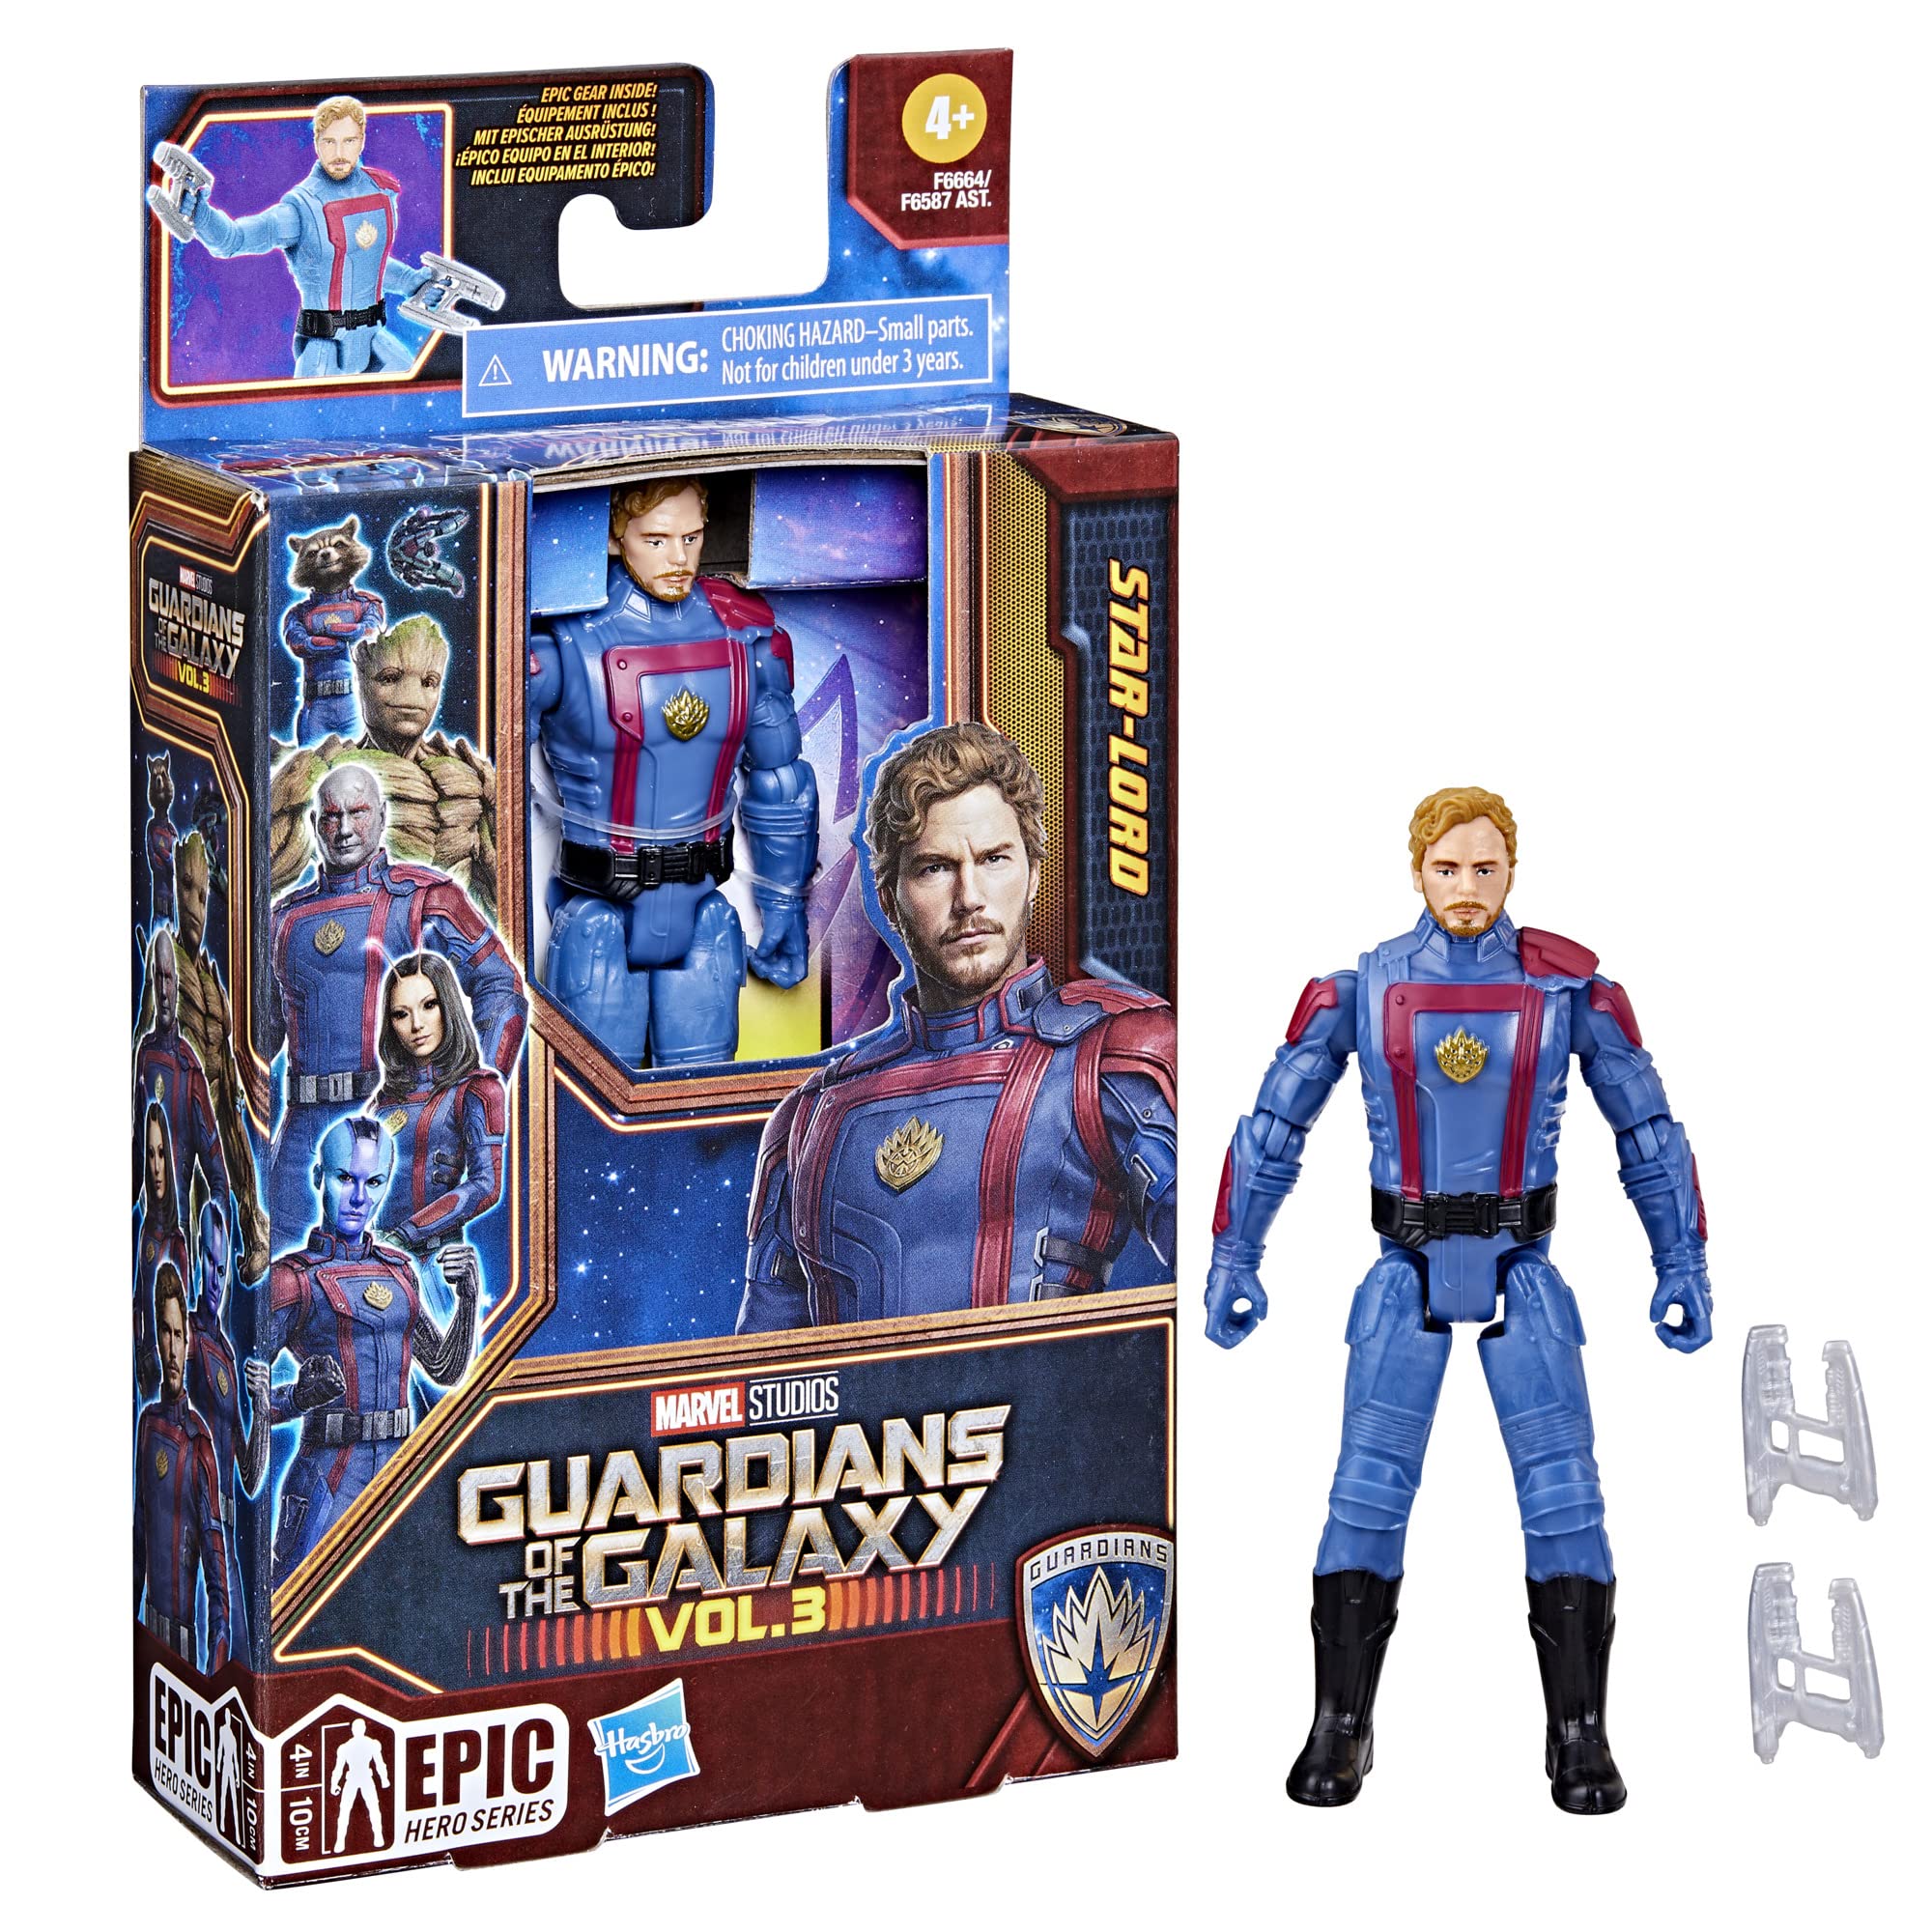 Marvel Hasbro Studios’ Guardians of The Galaxy Vol.3 Star-Lord Action Figure,Epic Hero Series,Super Hero Toys for Kids Ages 4 and Up,Toys